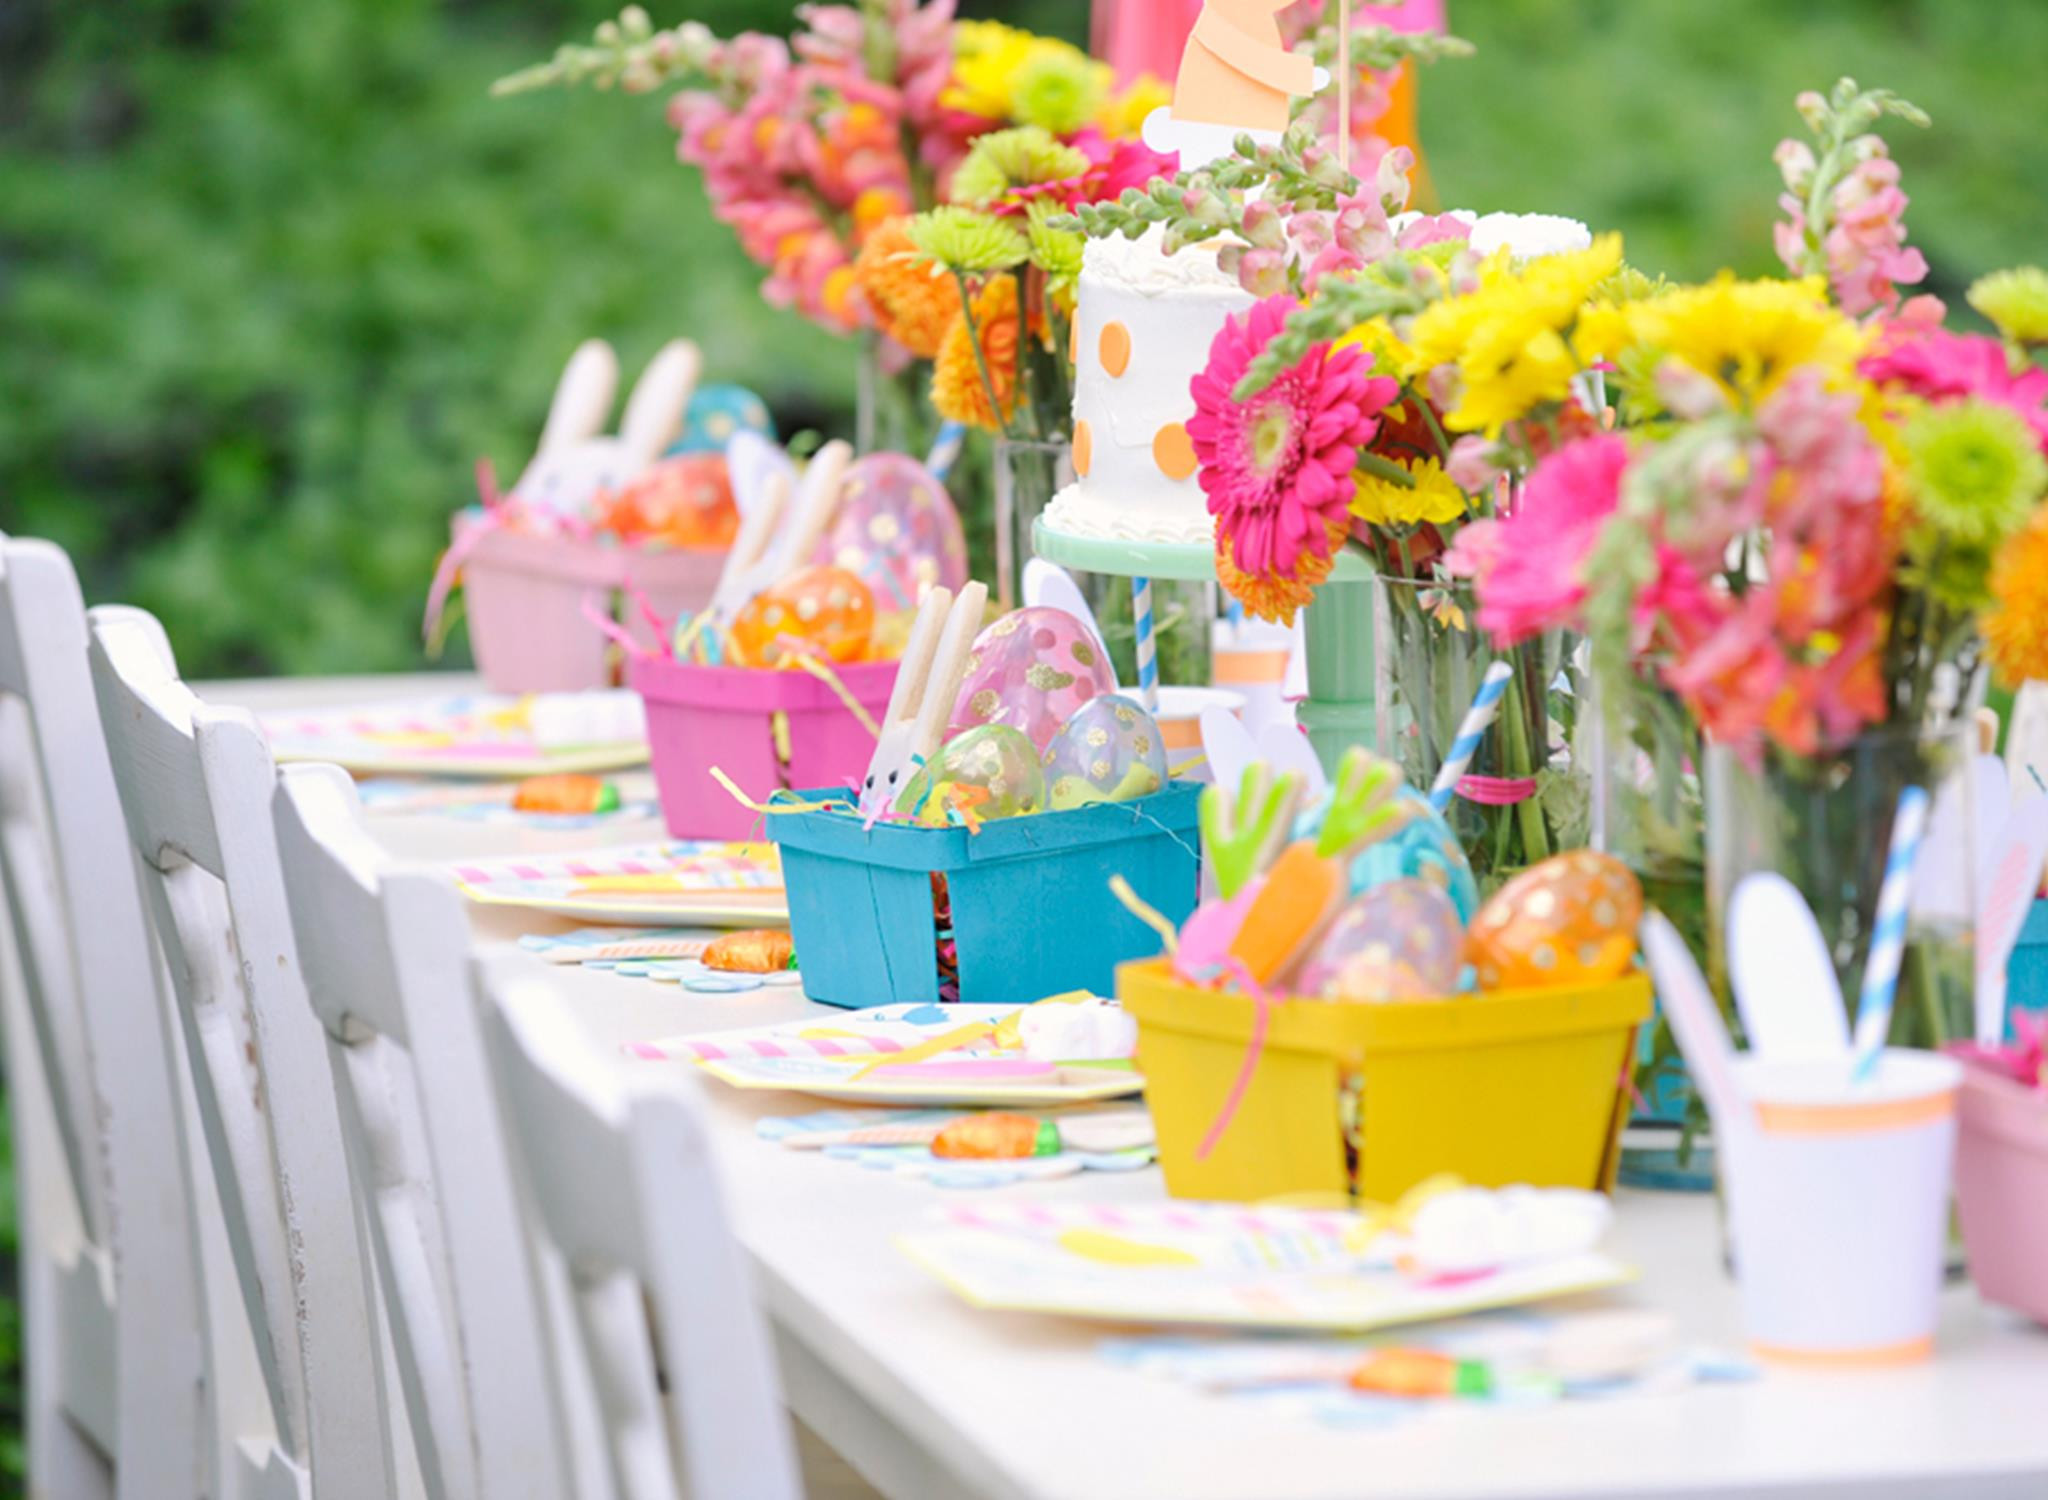 Decorating Ideas For Easter Party
 Plan a Bunny tastic Kids Easter Party Project Nursery